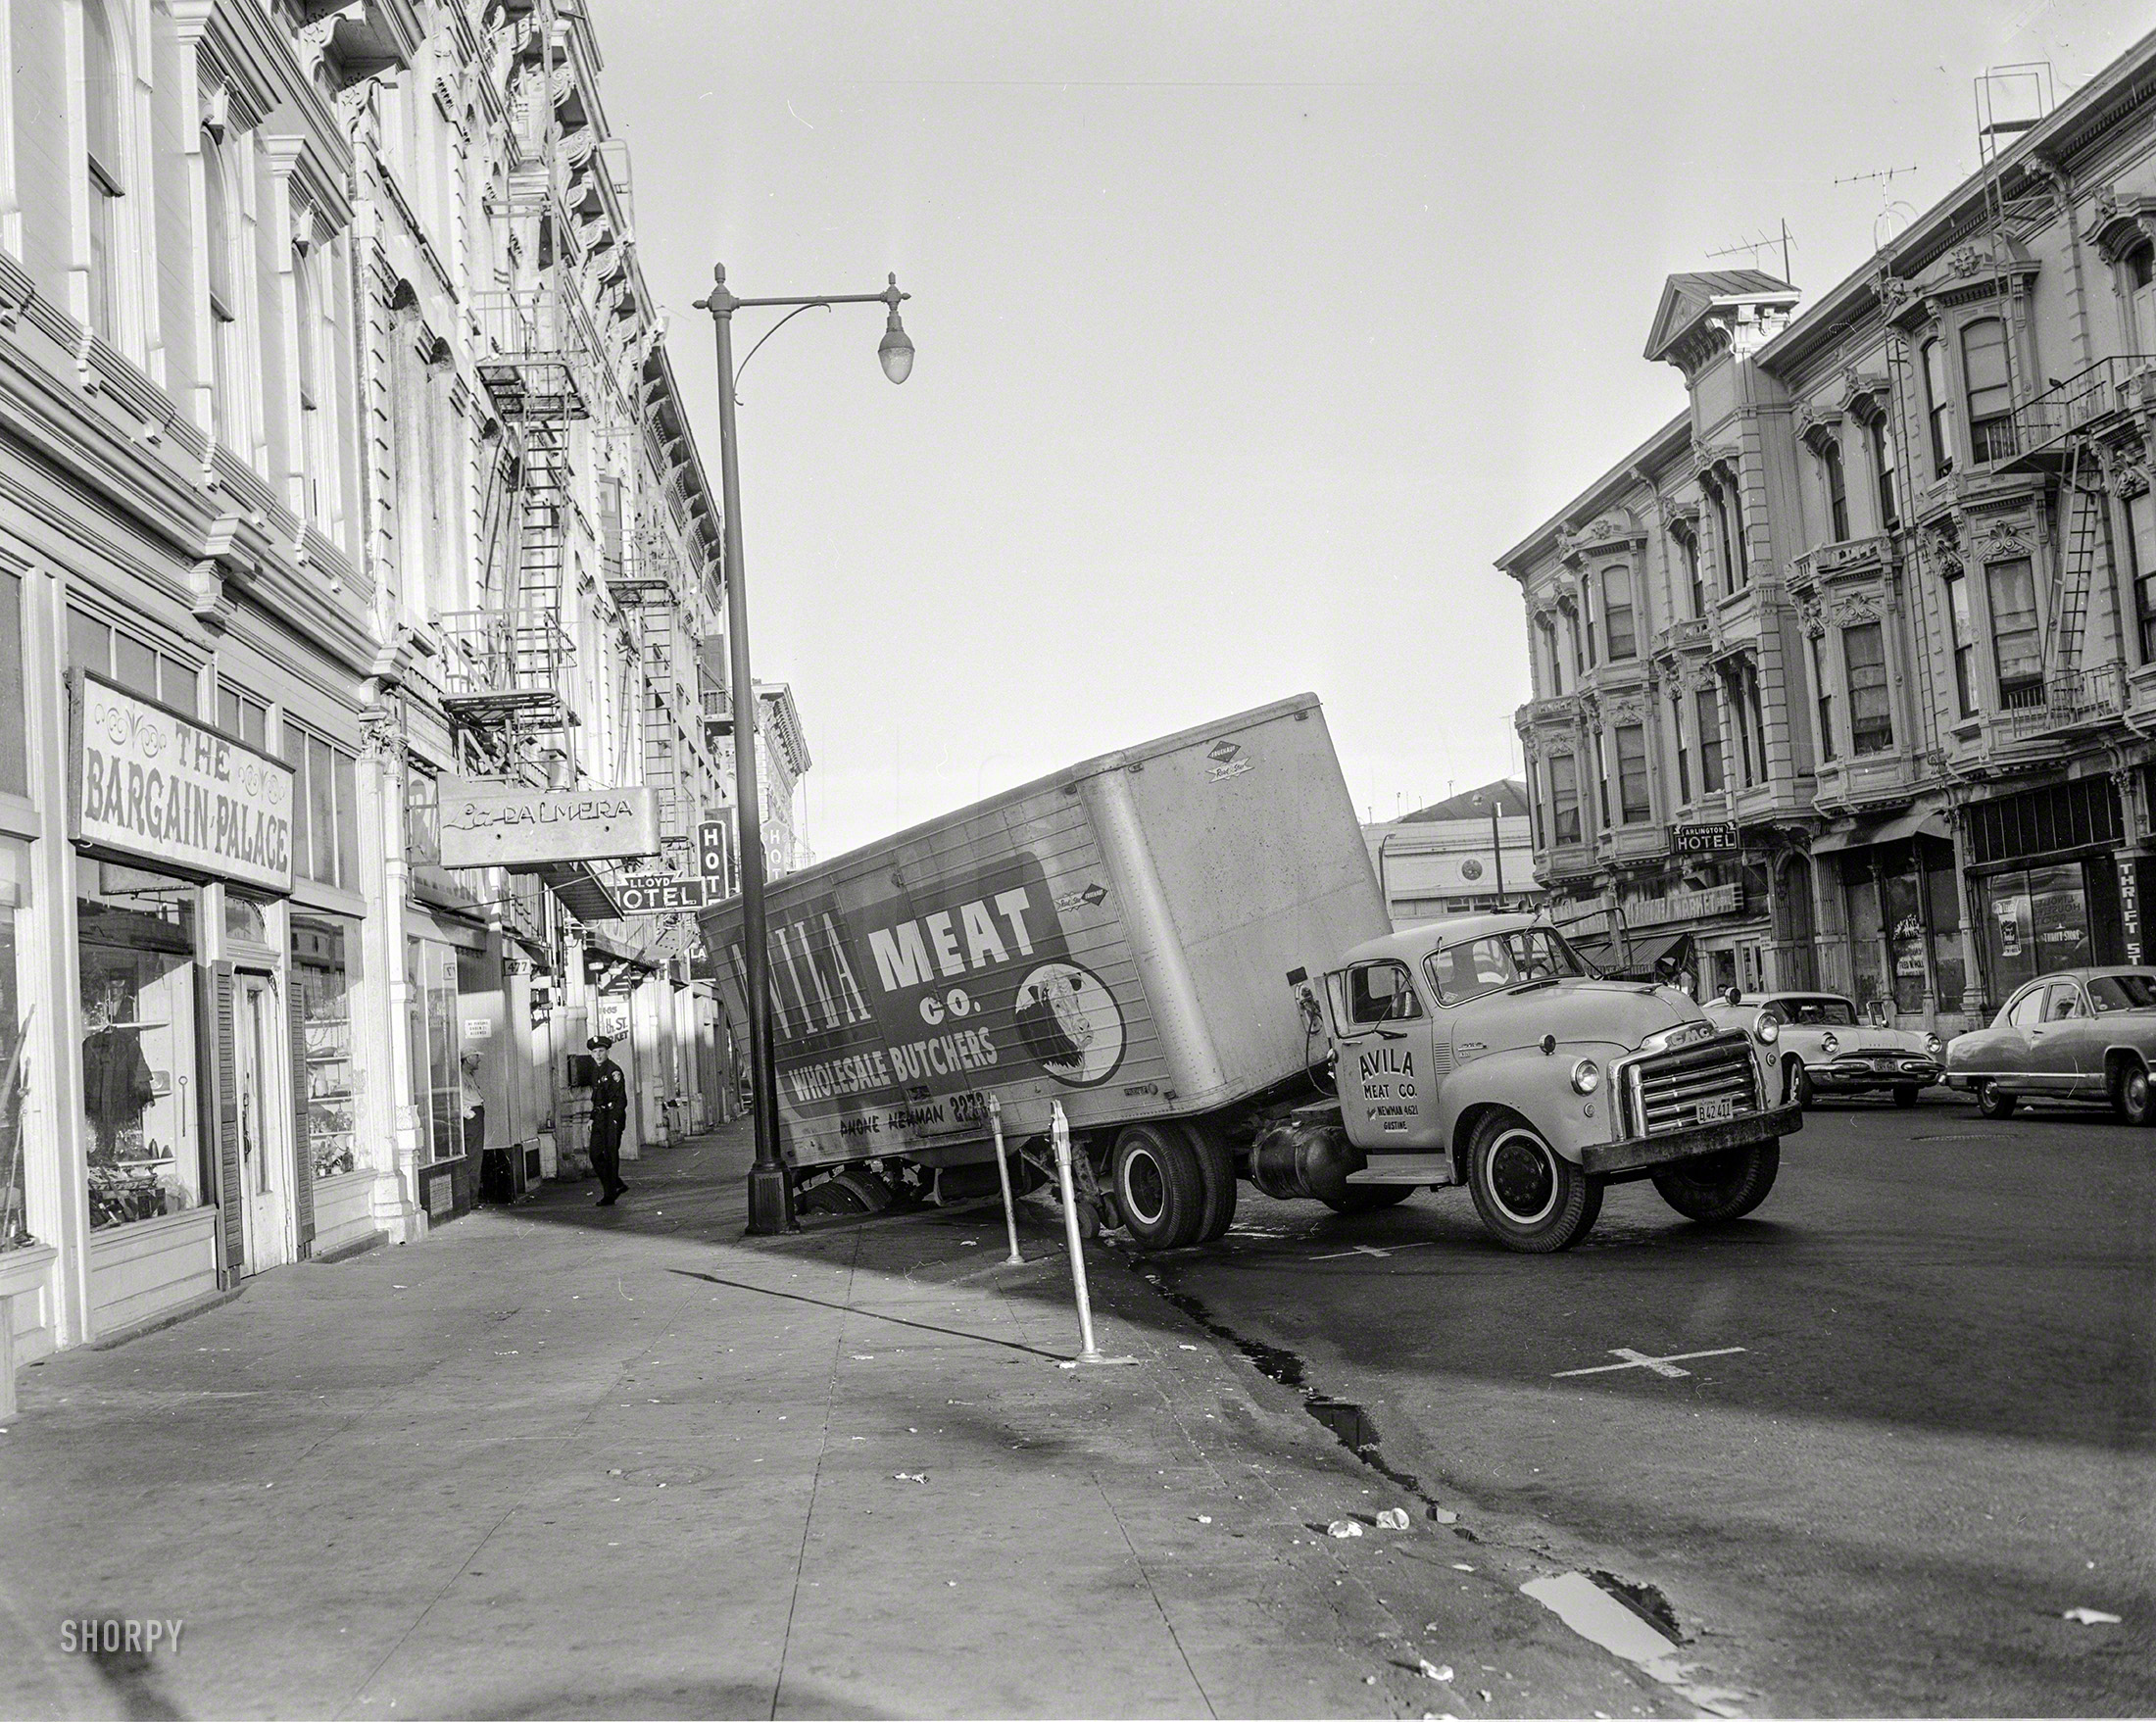 Oakland, California, circa 1957, and another motoring mishap -- an Avila Meat Co. truck that seems to have broken through the sidewalk. View full size.